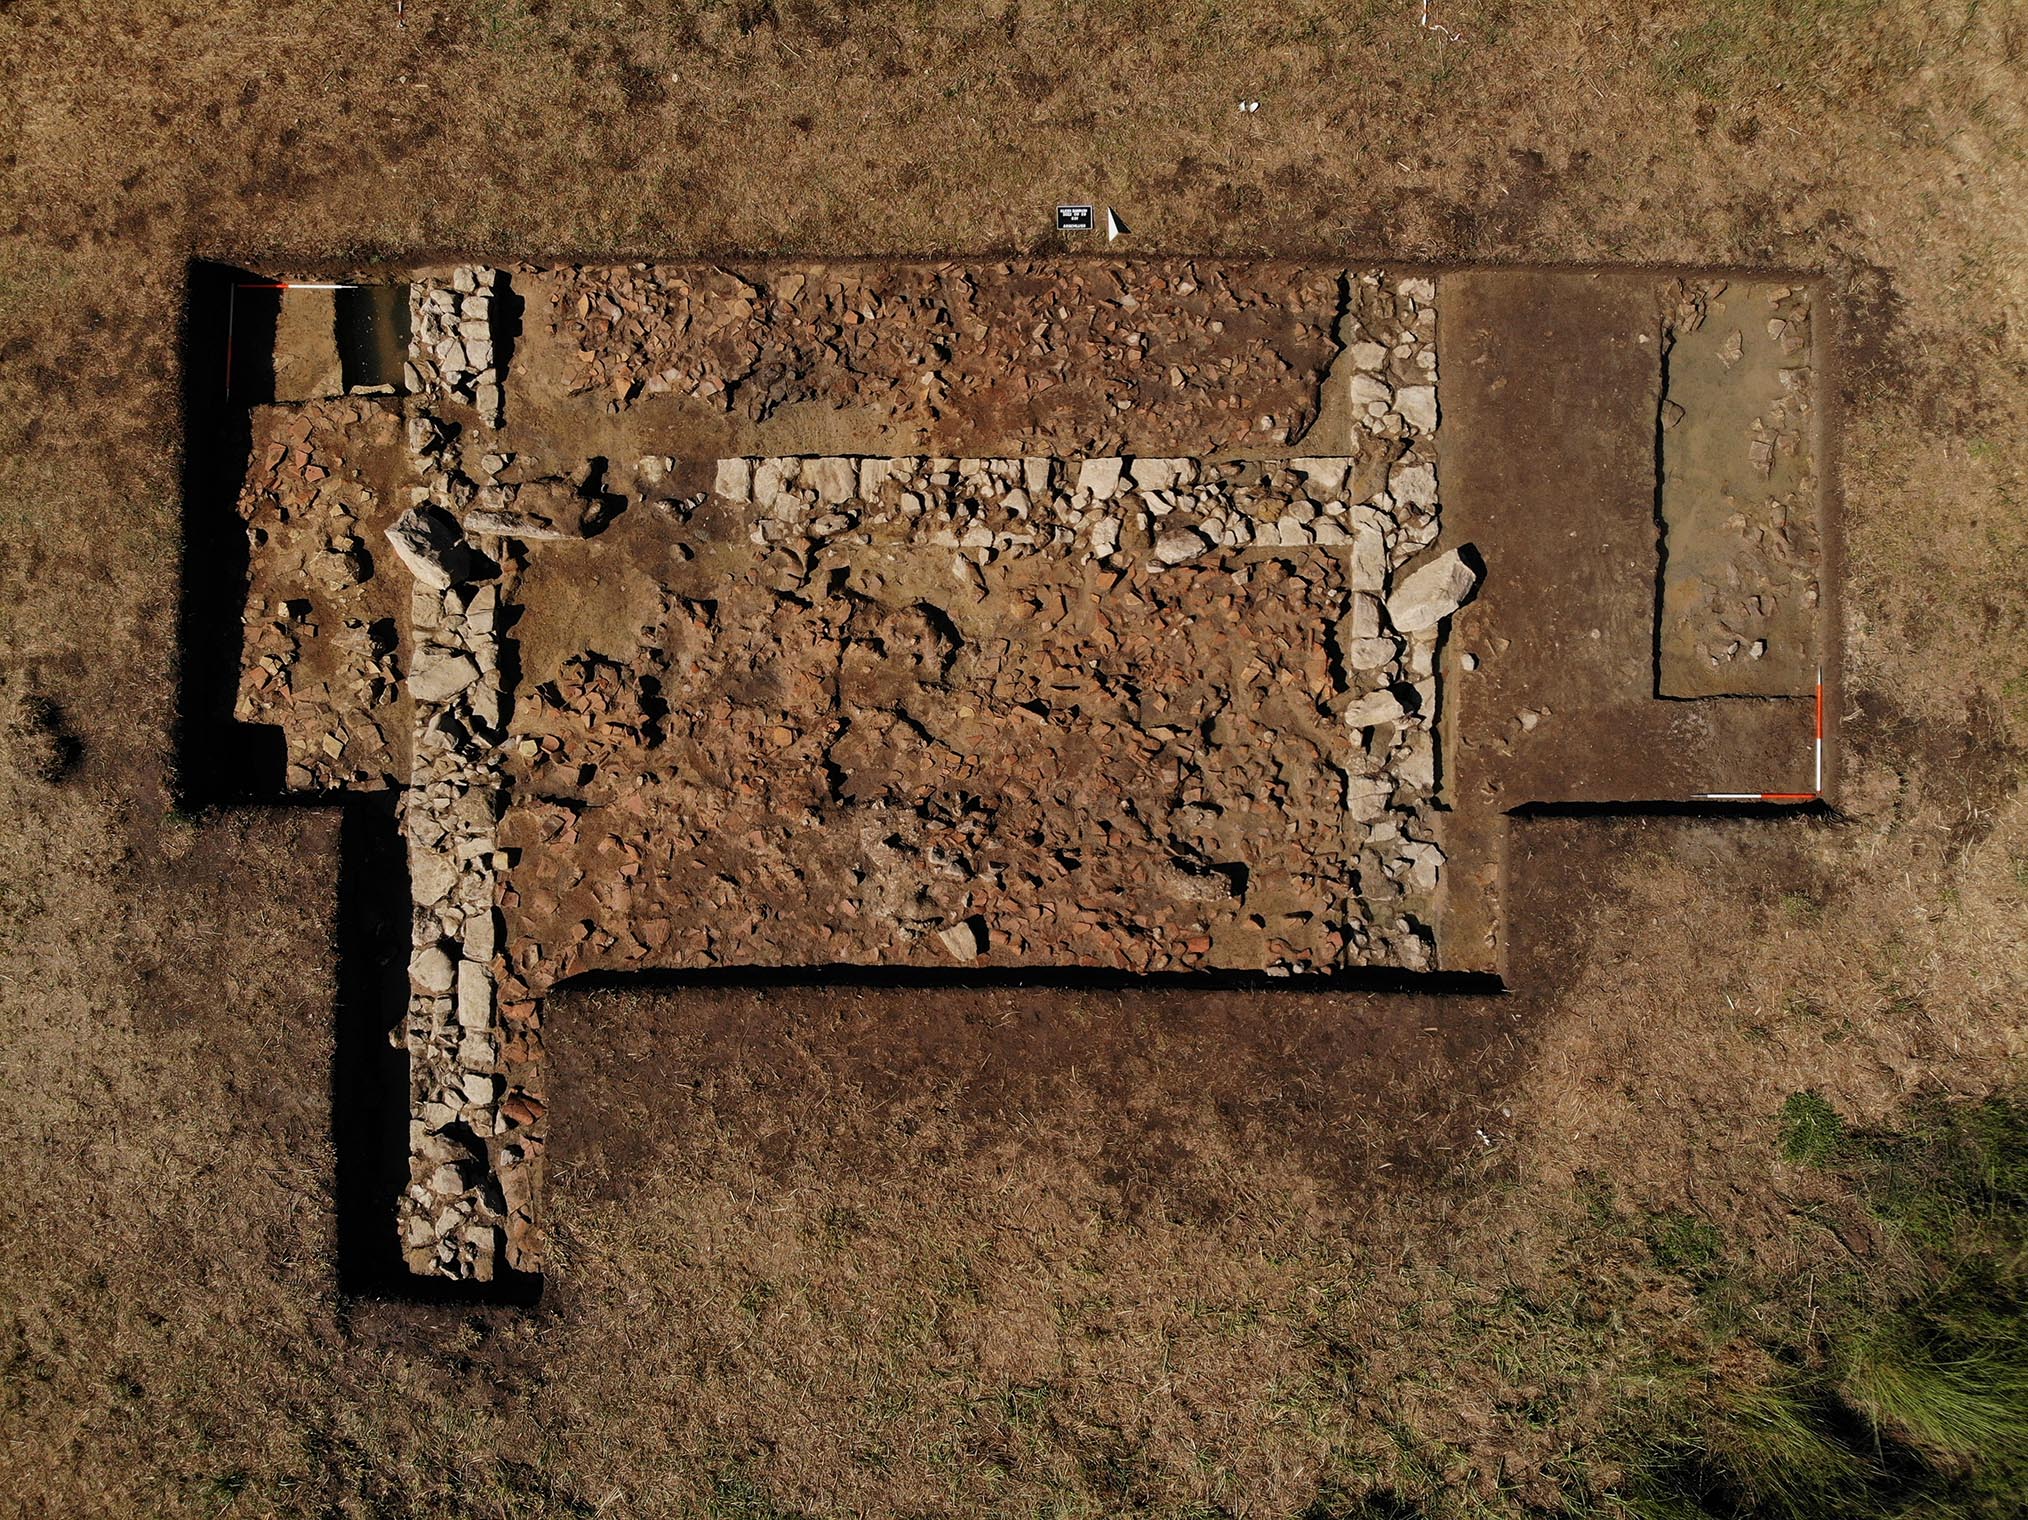 Discovery of the temple of Poseidon located at the Kleidi site near Samikon